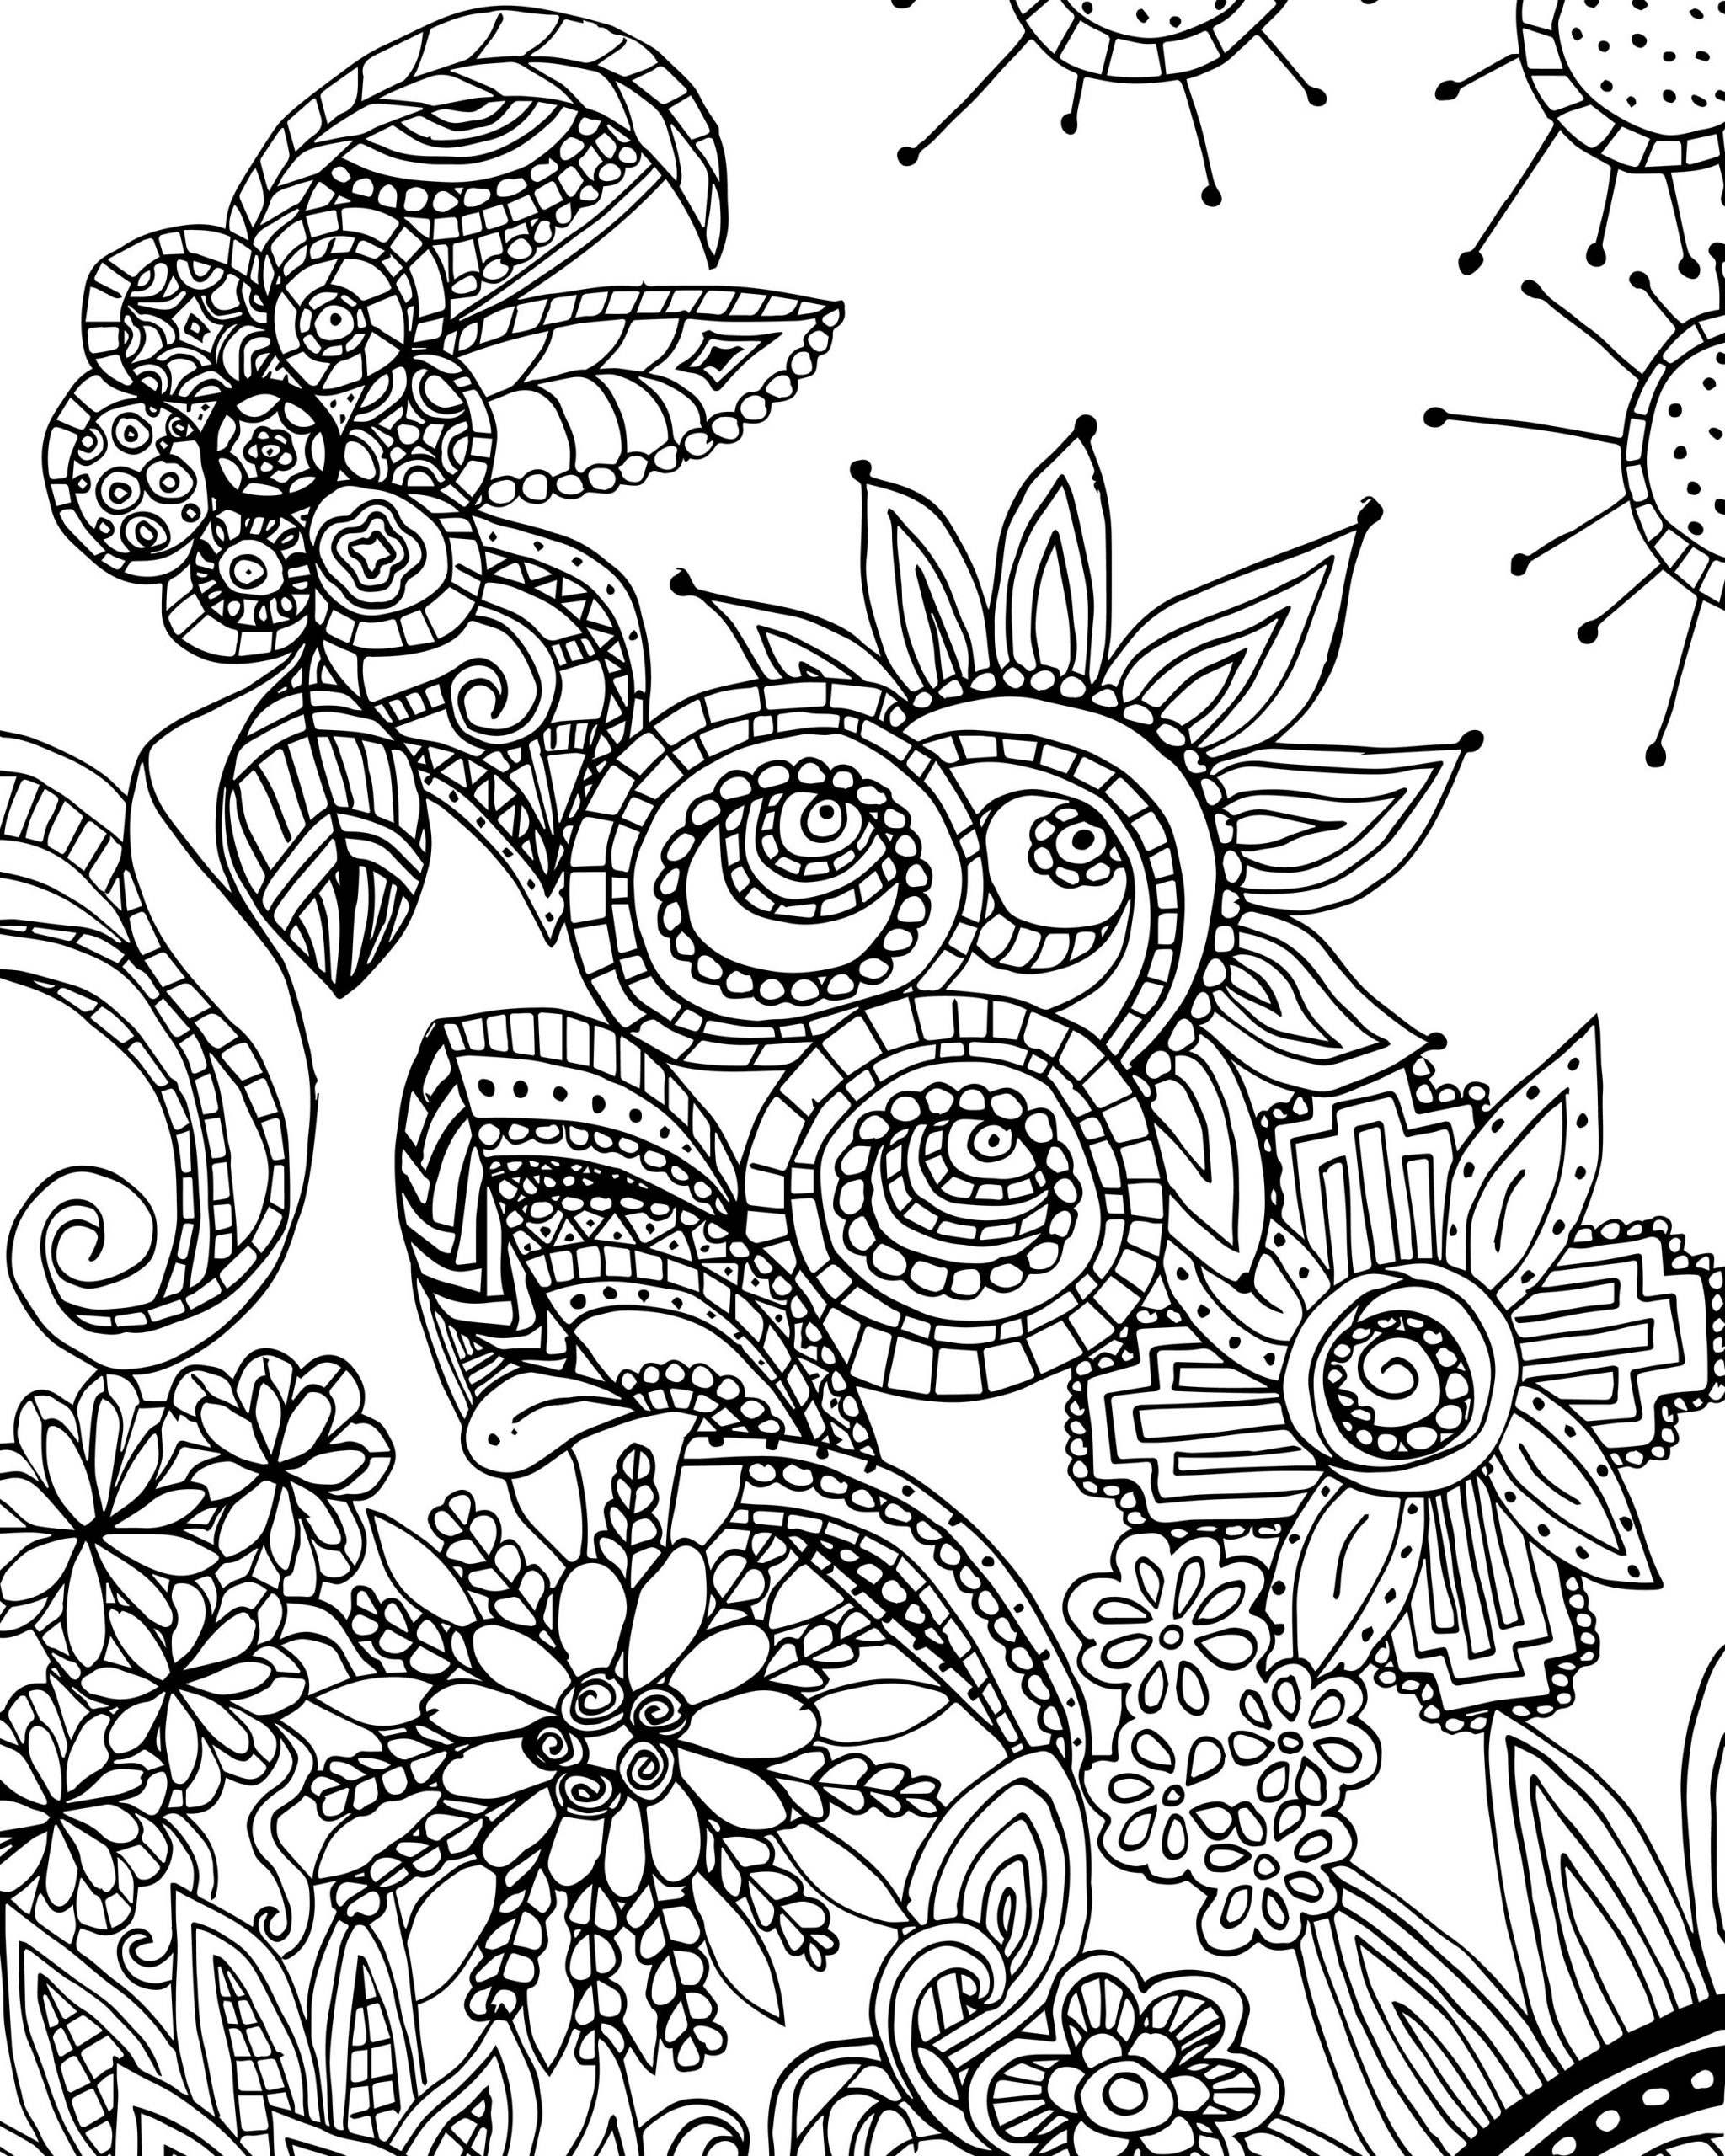 Coloring Pages : Coloring Zen Doodleing Book Educational Insights ...